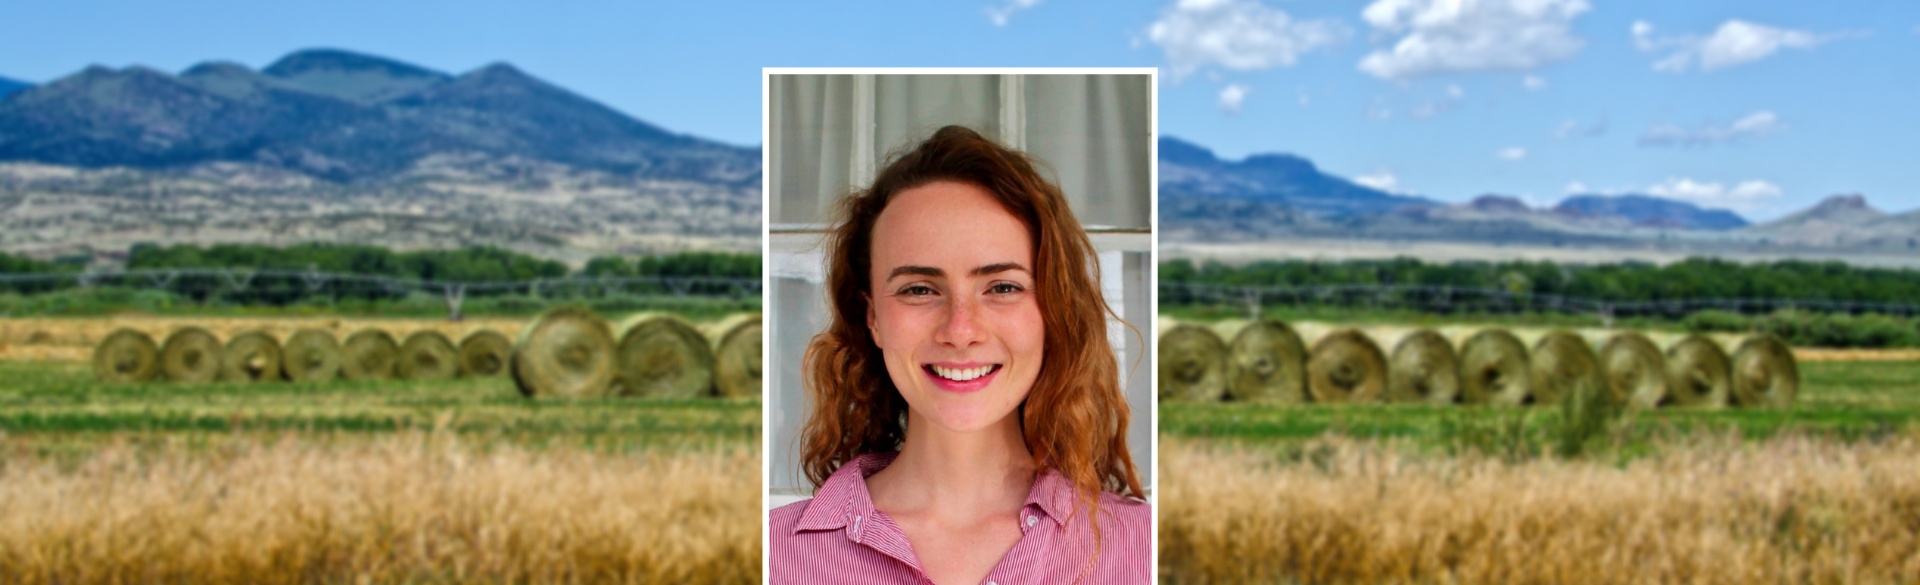 Woman smiling in headshot on background of Colorado mountains